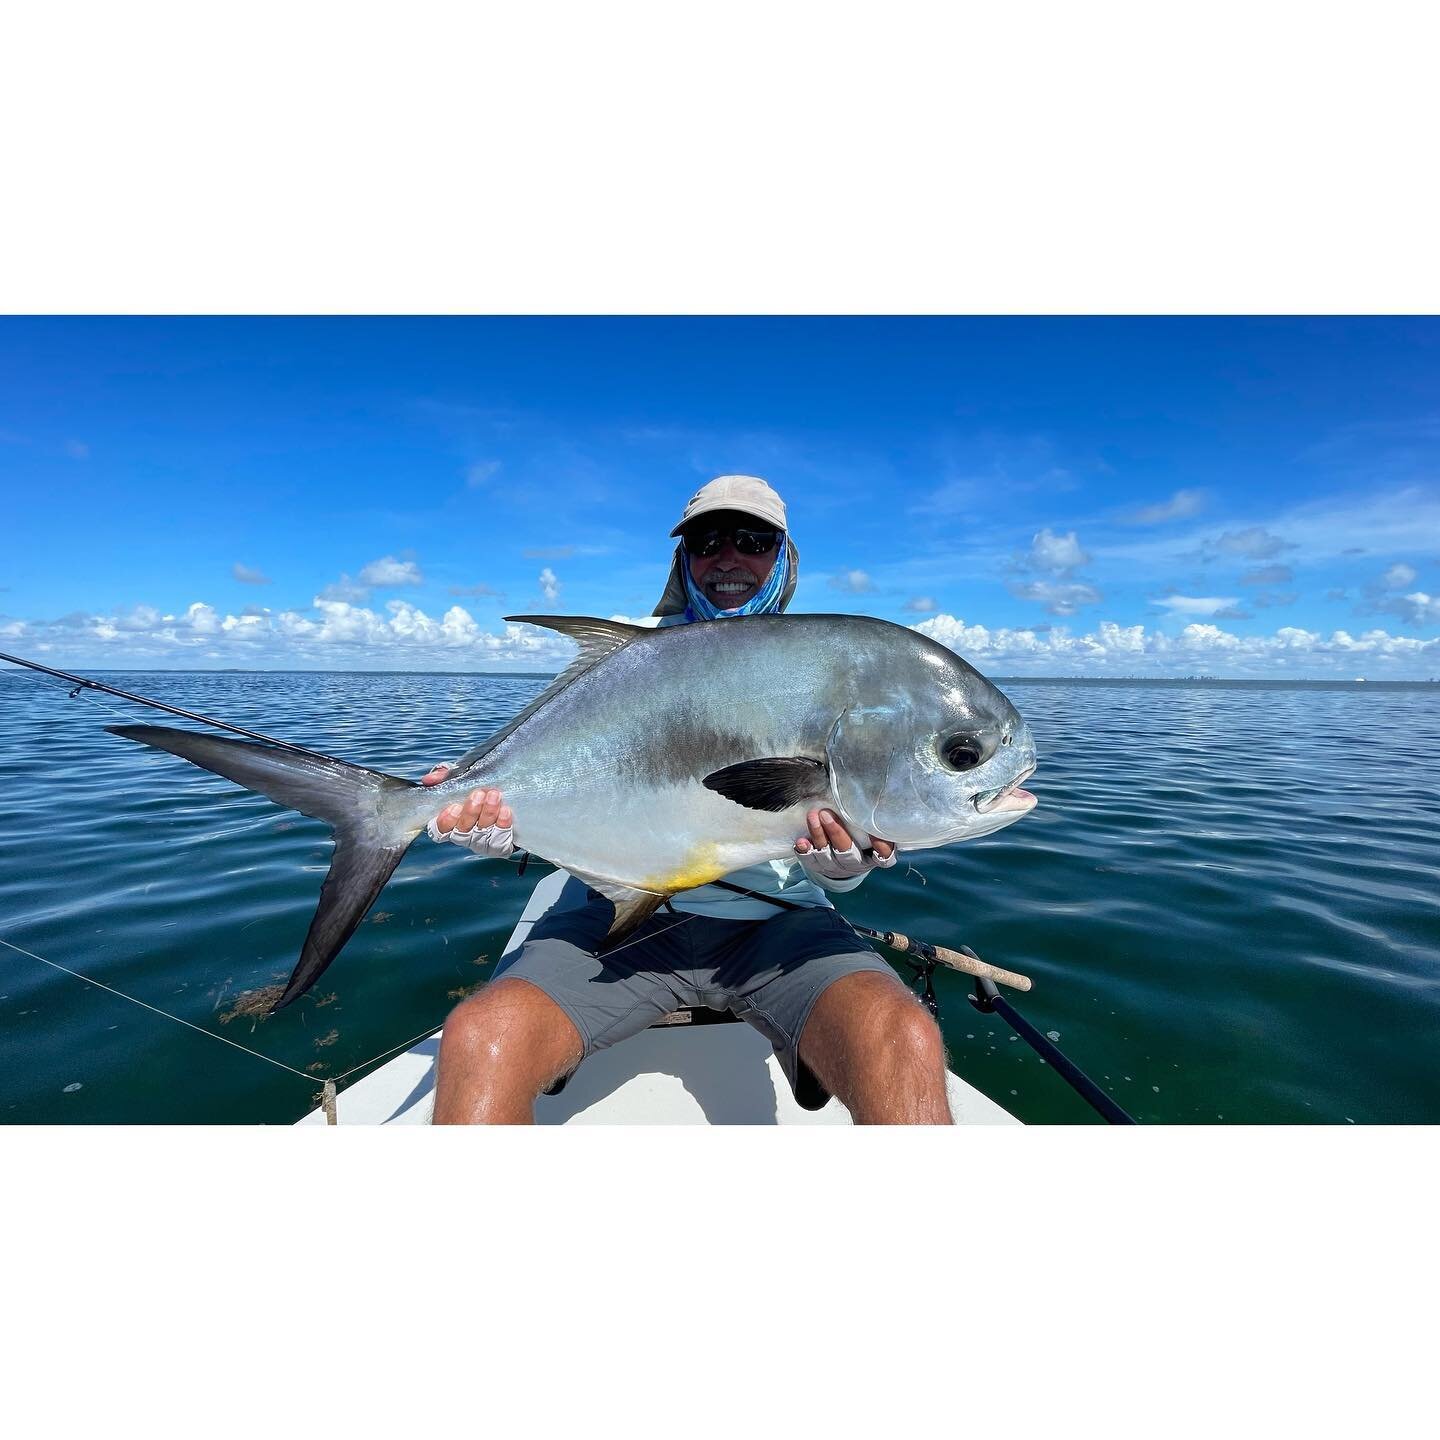 My client Stu and his first sightfished permit. Stoked to get him to his first one after some tough vis and shots. It&rsquo;s a grind&hellip;only way to sharpen up! 

Some other pics of recent catches as well 🤙🏽 @dan_diez_ @willyespinosa_ #lethimea